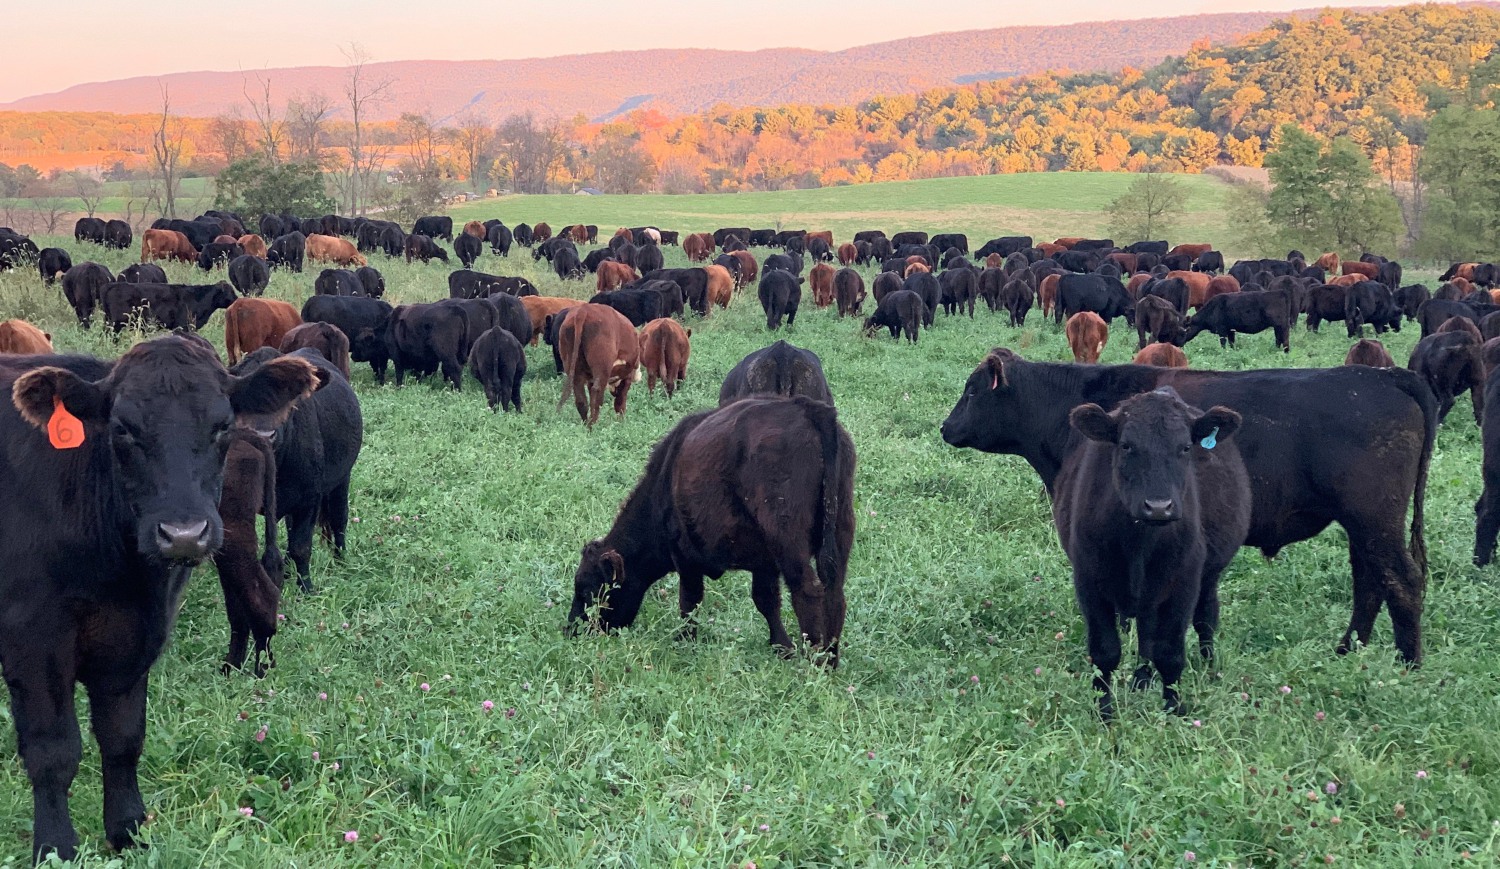 Near Country Provisions delivers high-quality, sustainable meats from local farmers and fishers to doorsteps in D.C., Maryland, and Virginia.